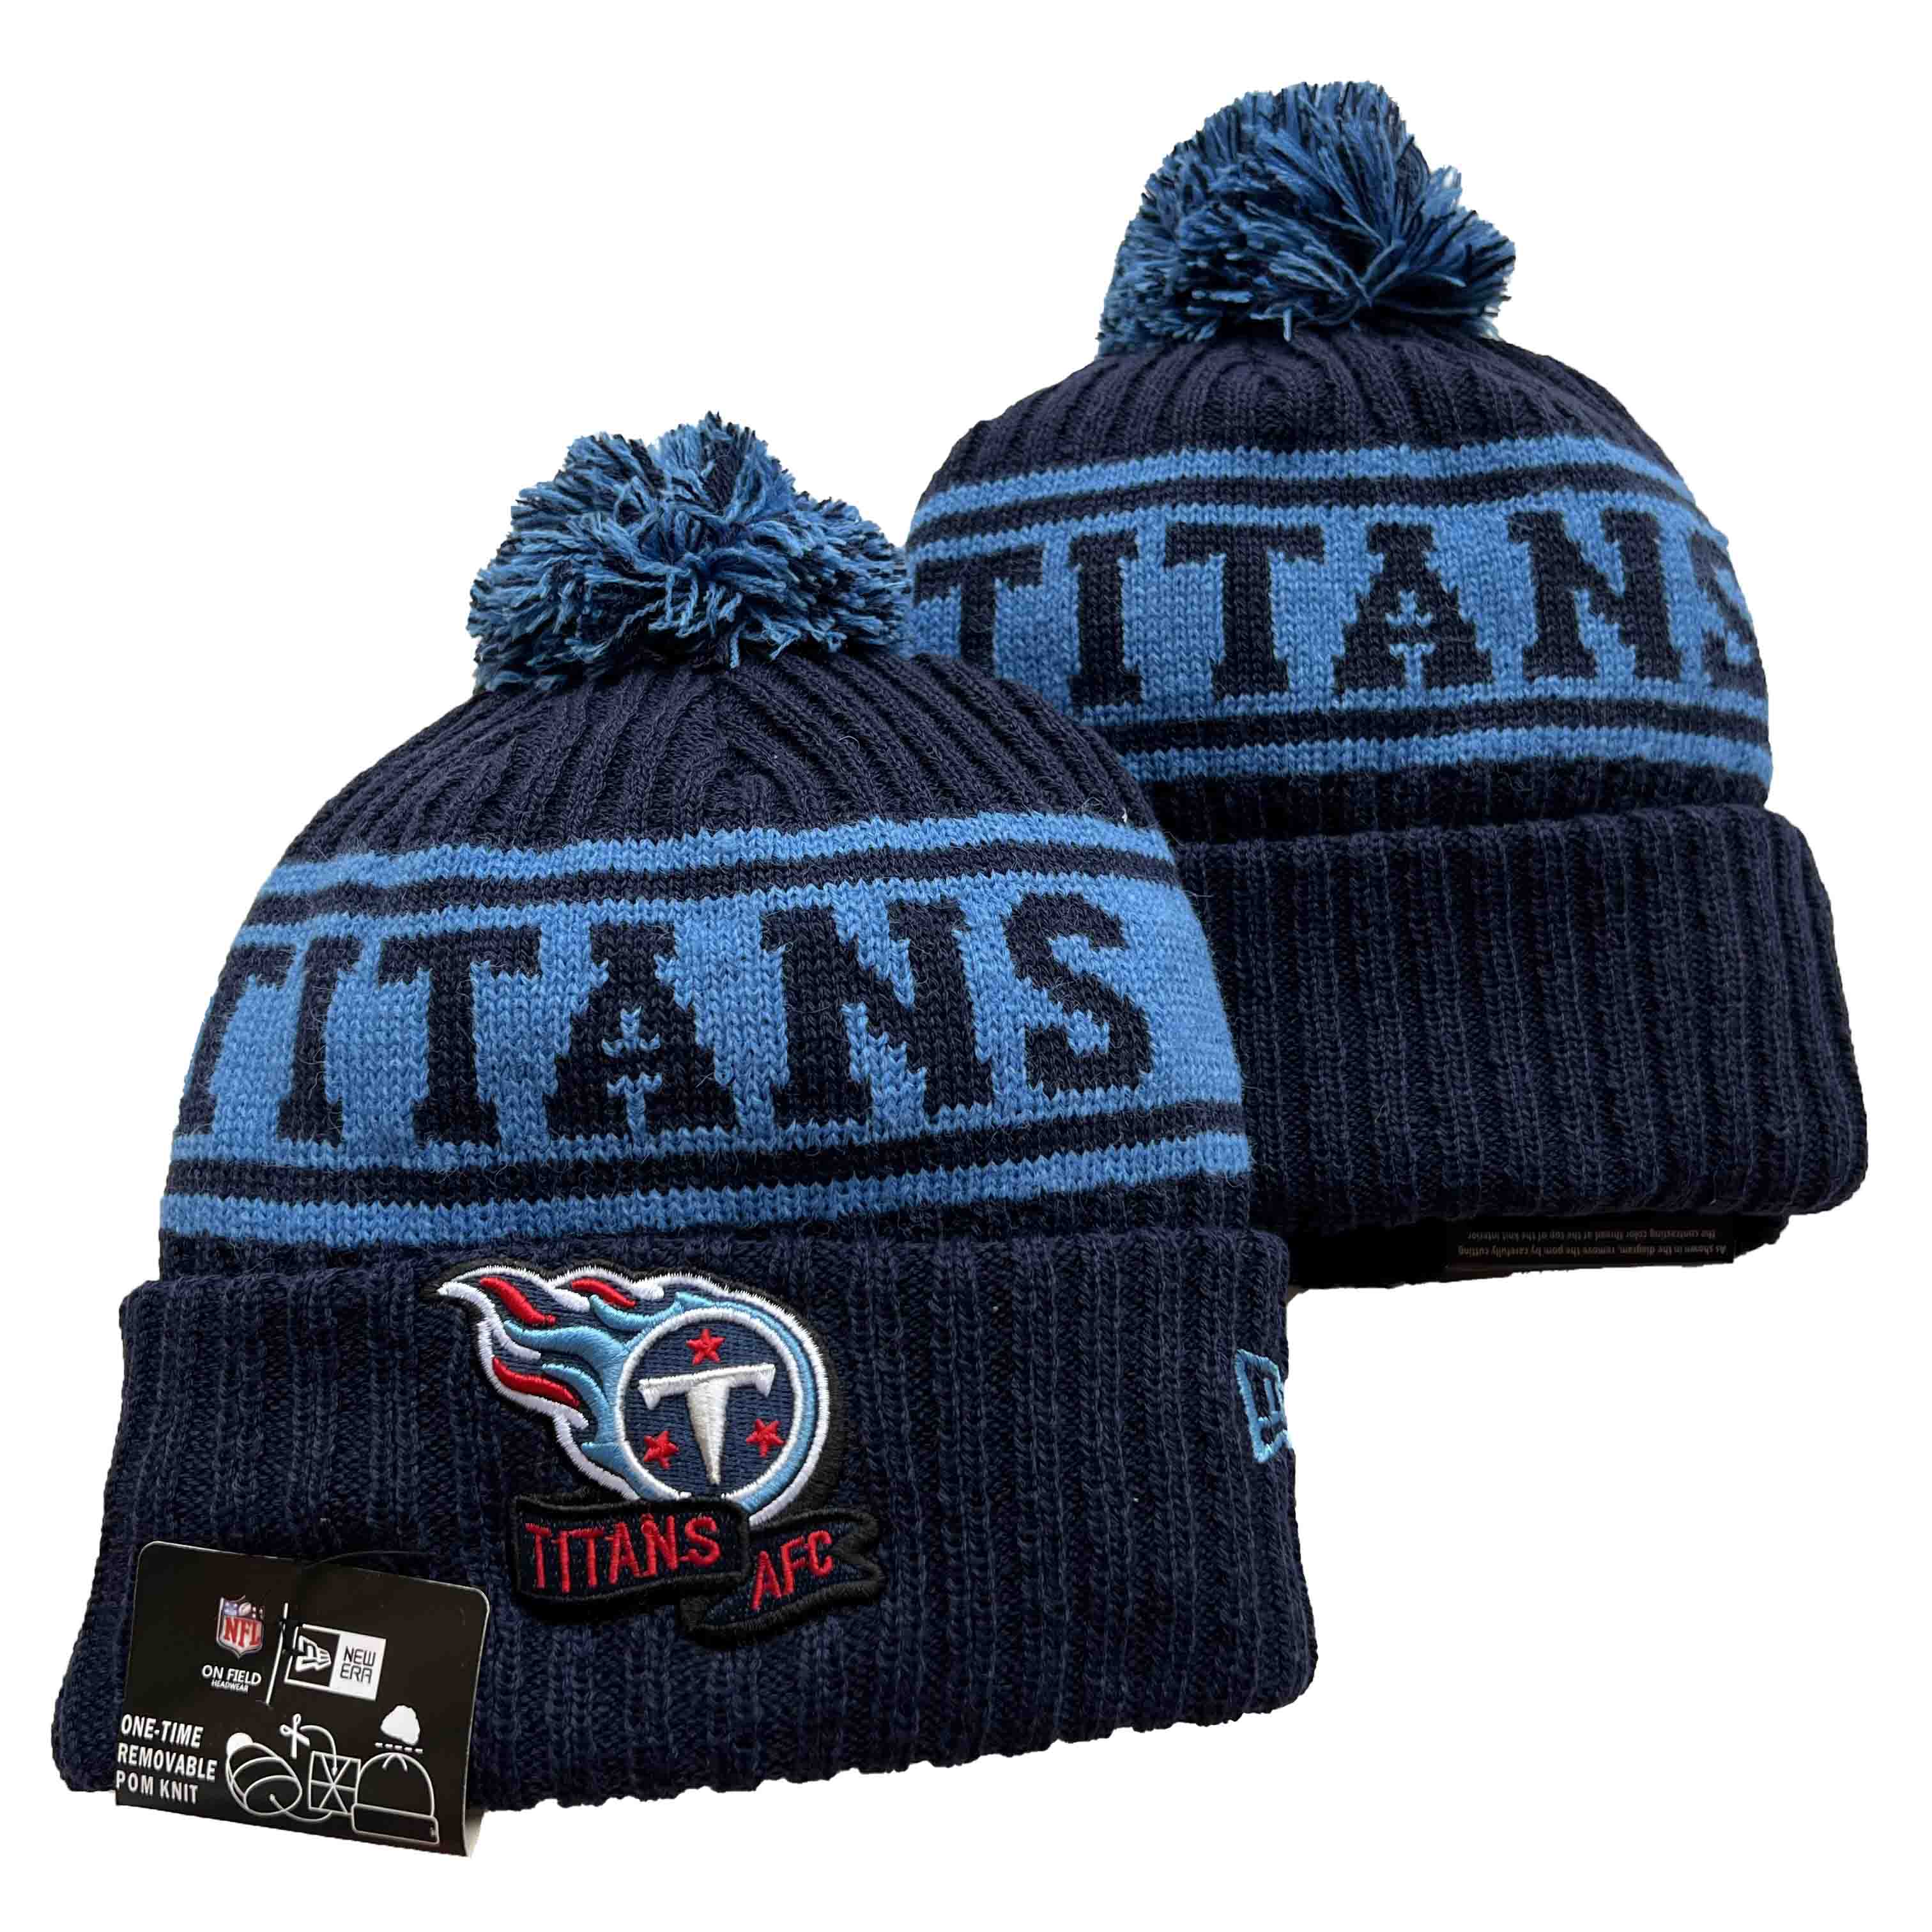 NFL Tennessee Titans Beanies Knit Hats-YD1311